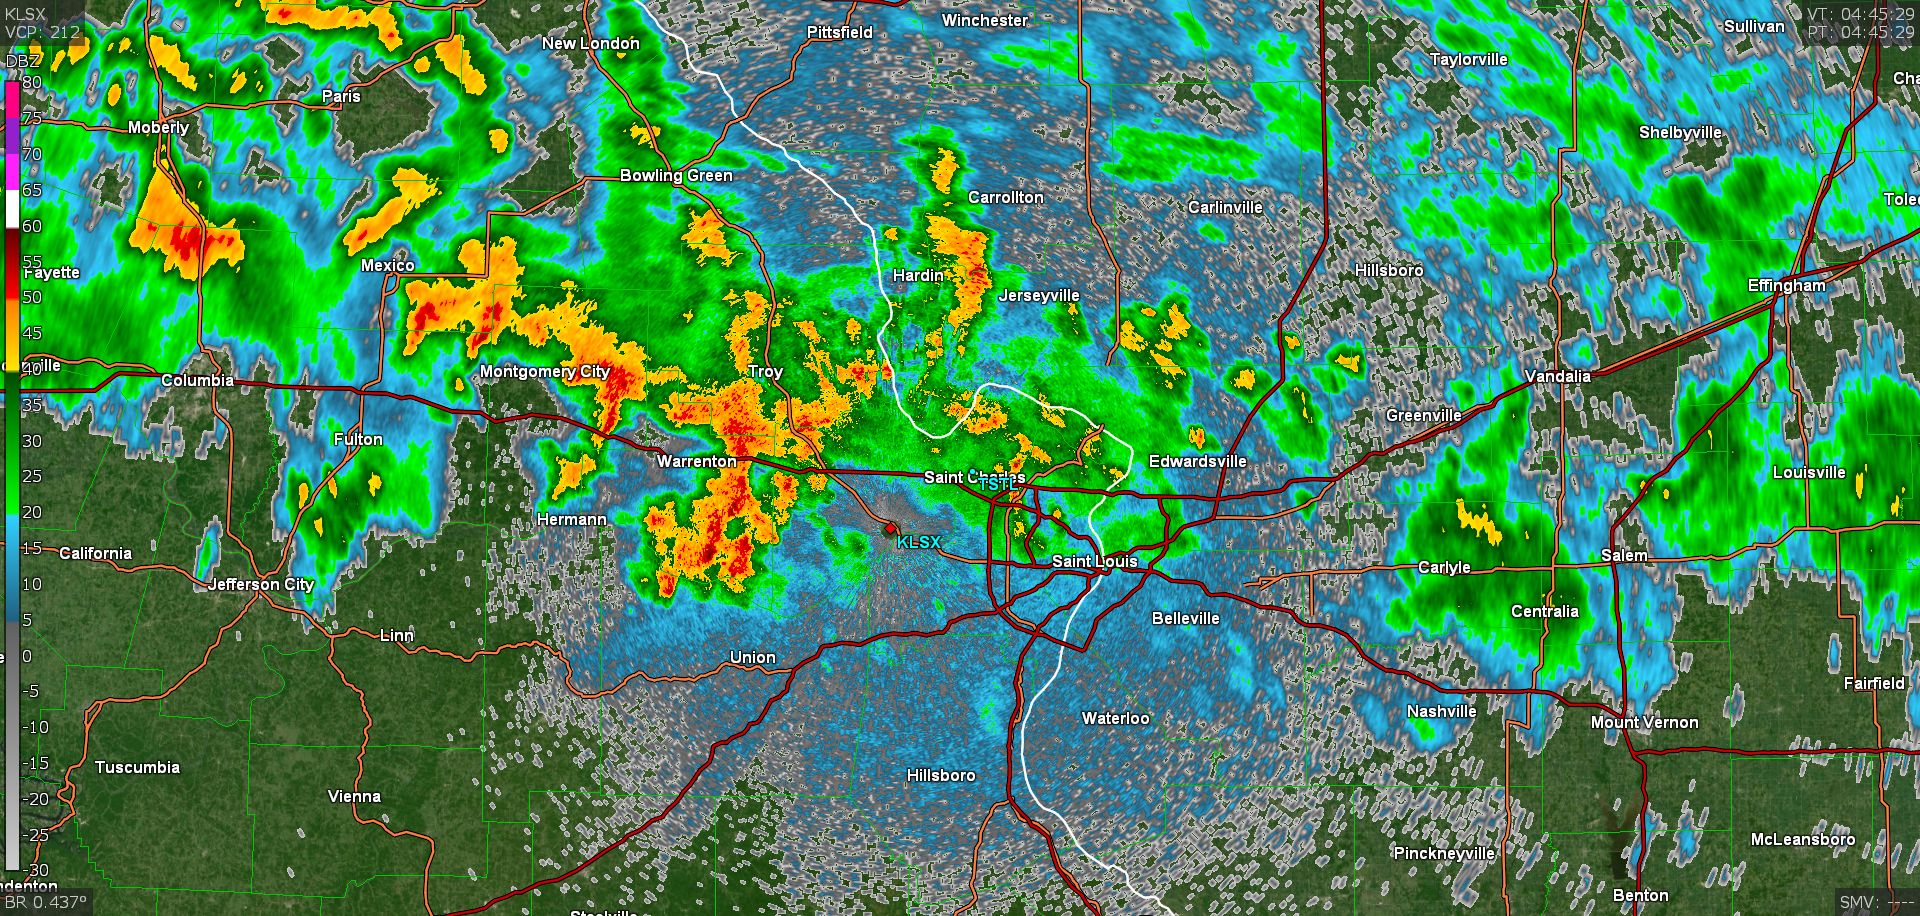 Image of radar reflectivity from KLSX in St. Louis valid at 11:45pm July 25th.